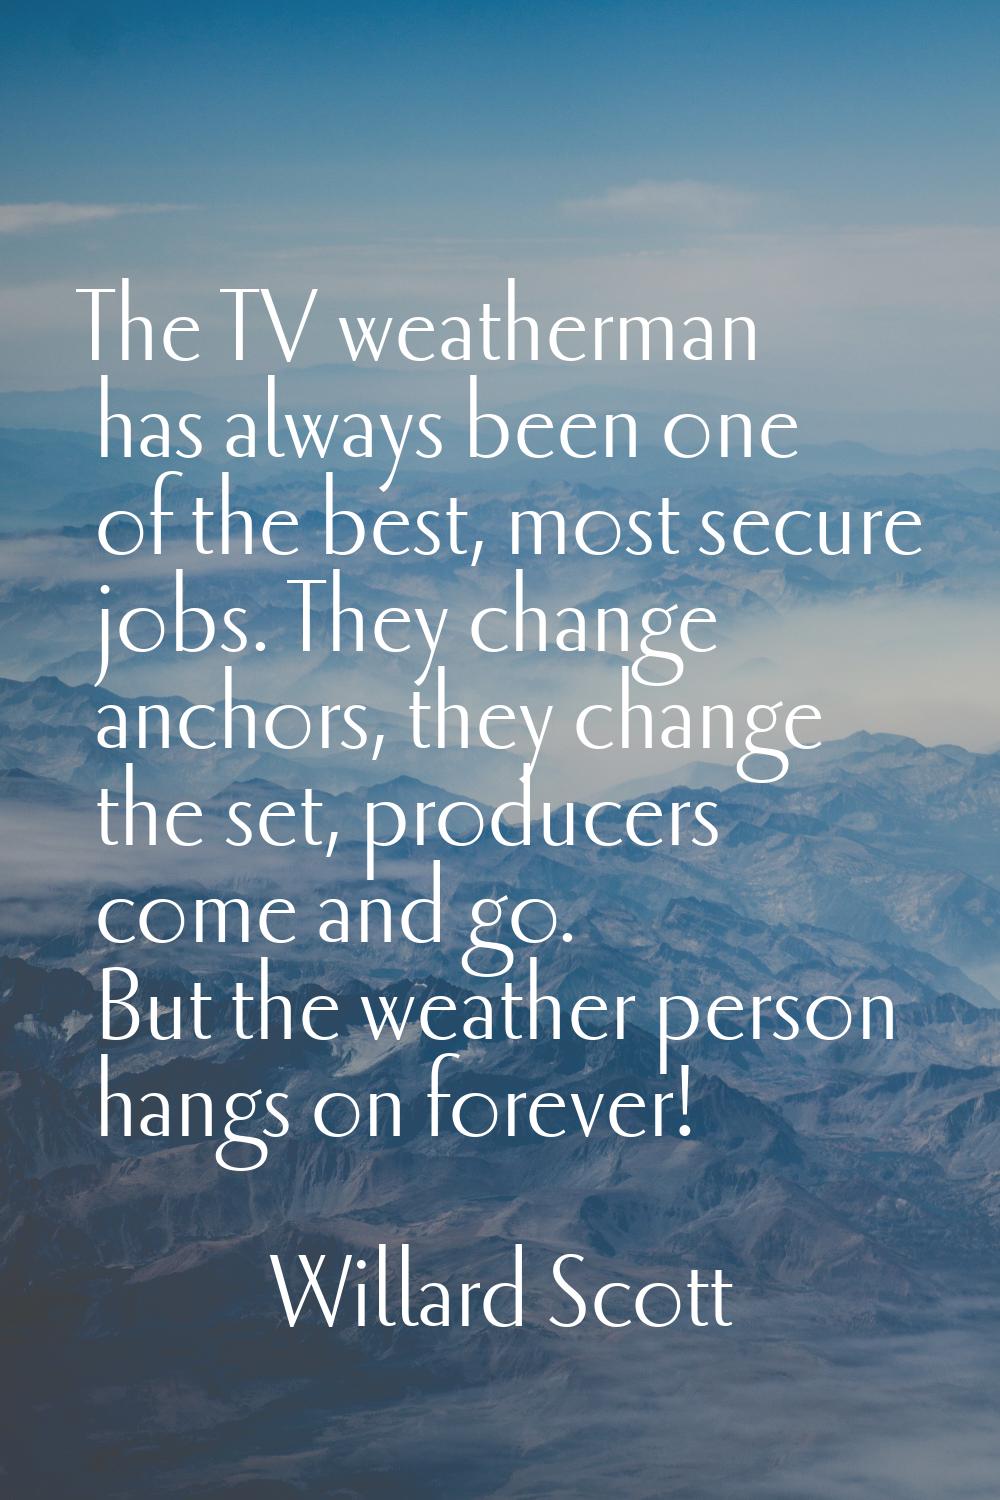 The TV weatherman has always been one of the best, most secure jobs. They change anchors, they chan